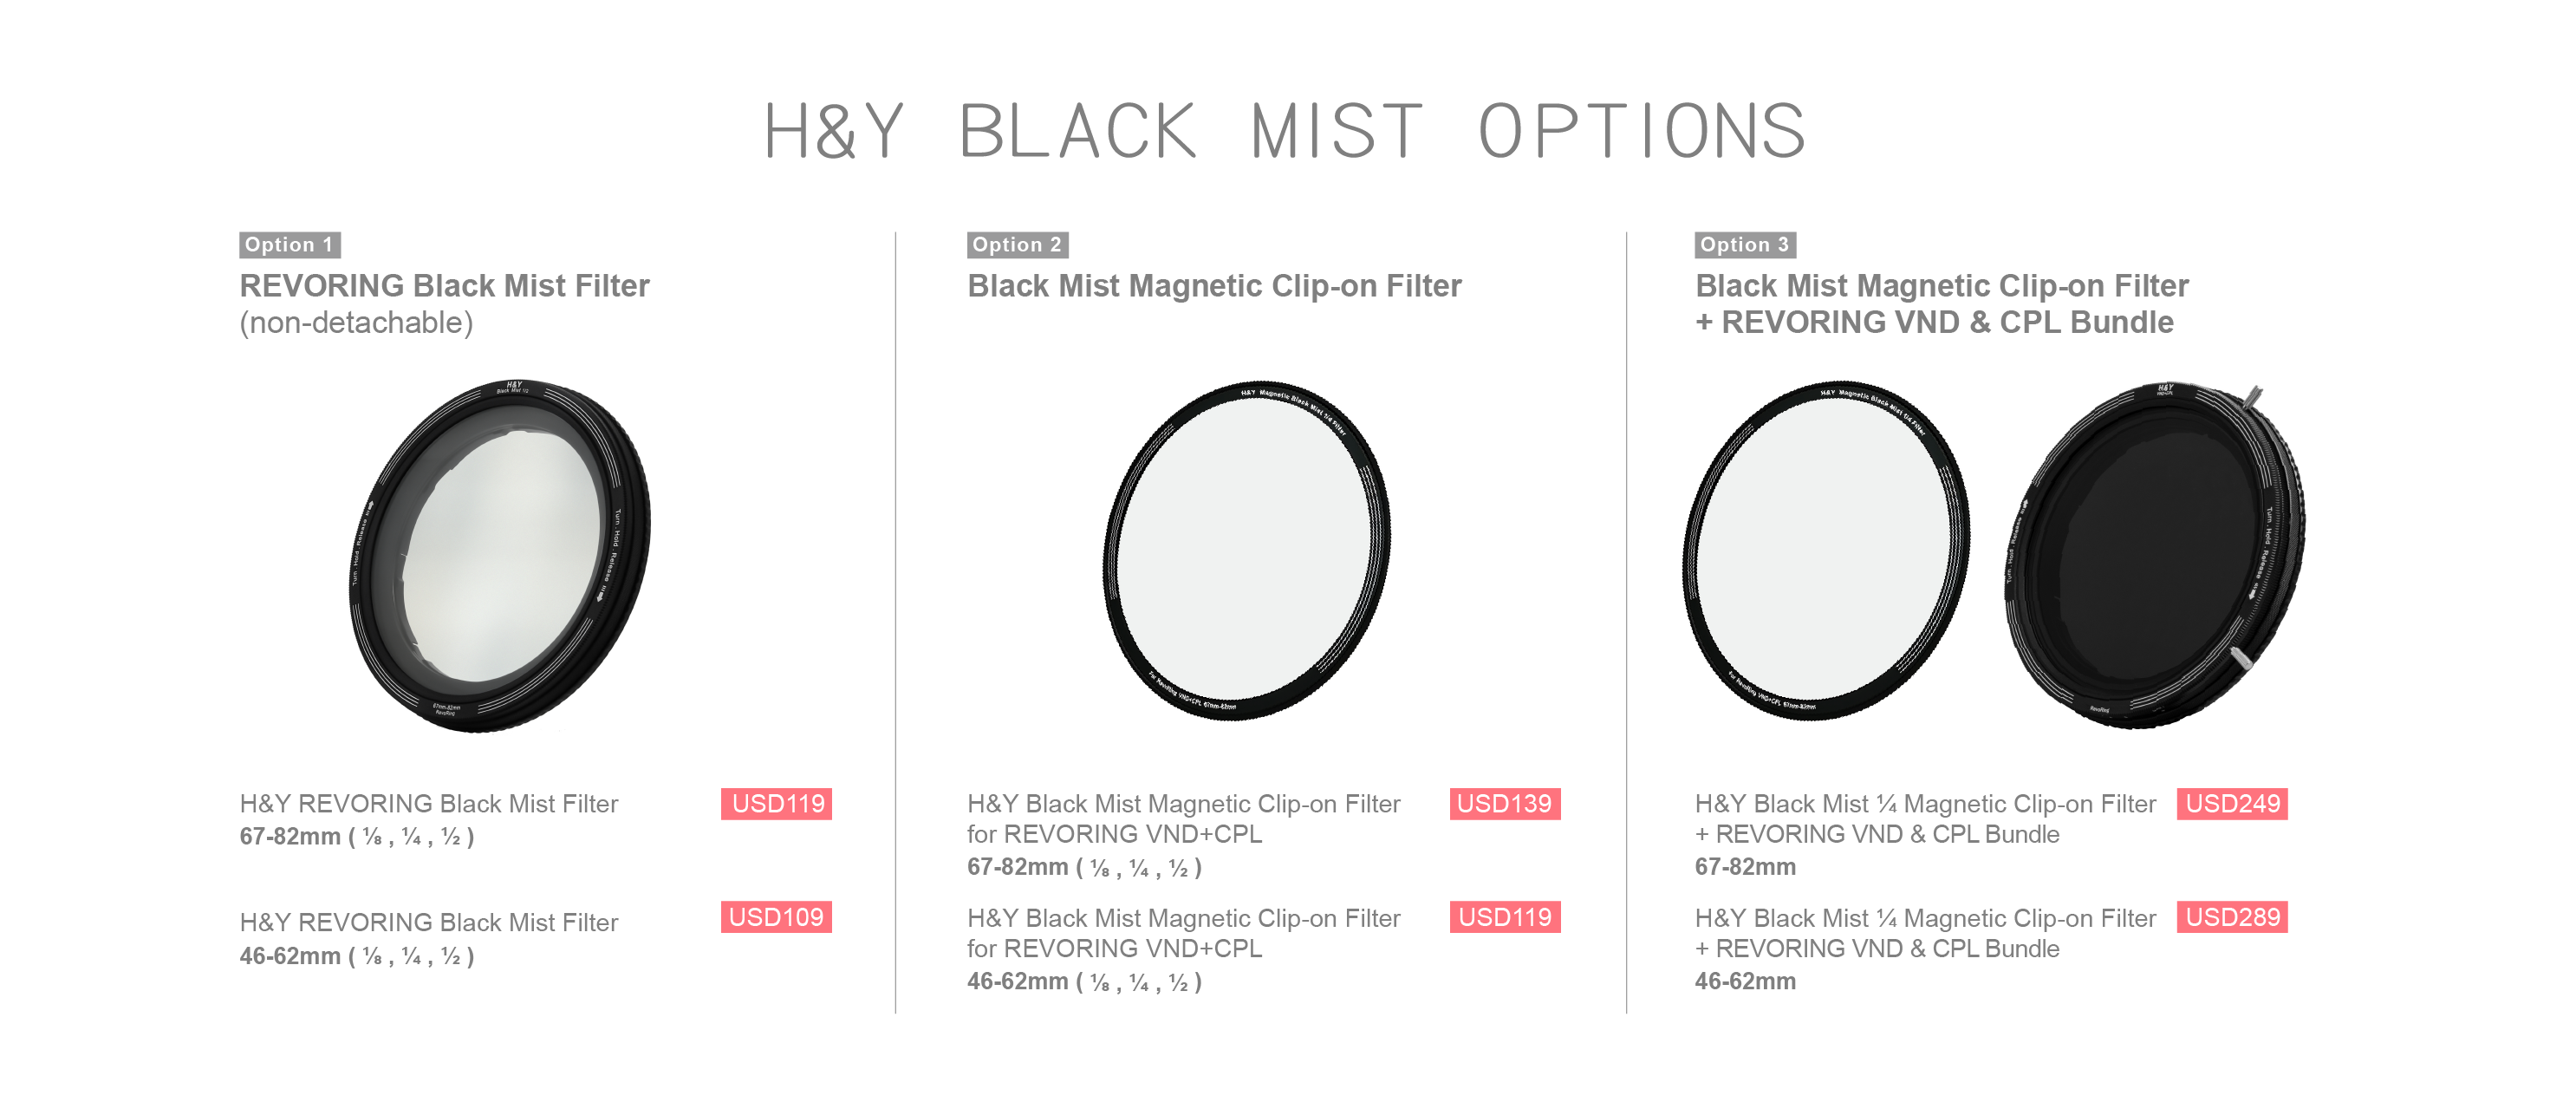 H&Y REVORING Black Mist Filter and Attachments Released | CineD